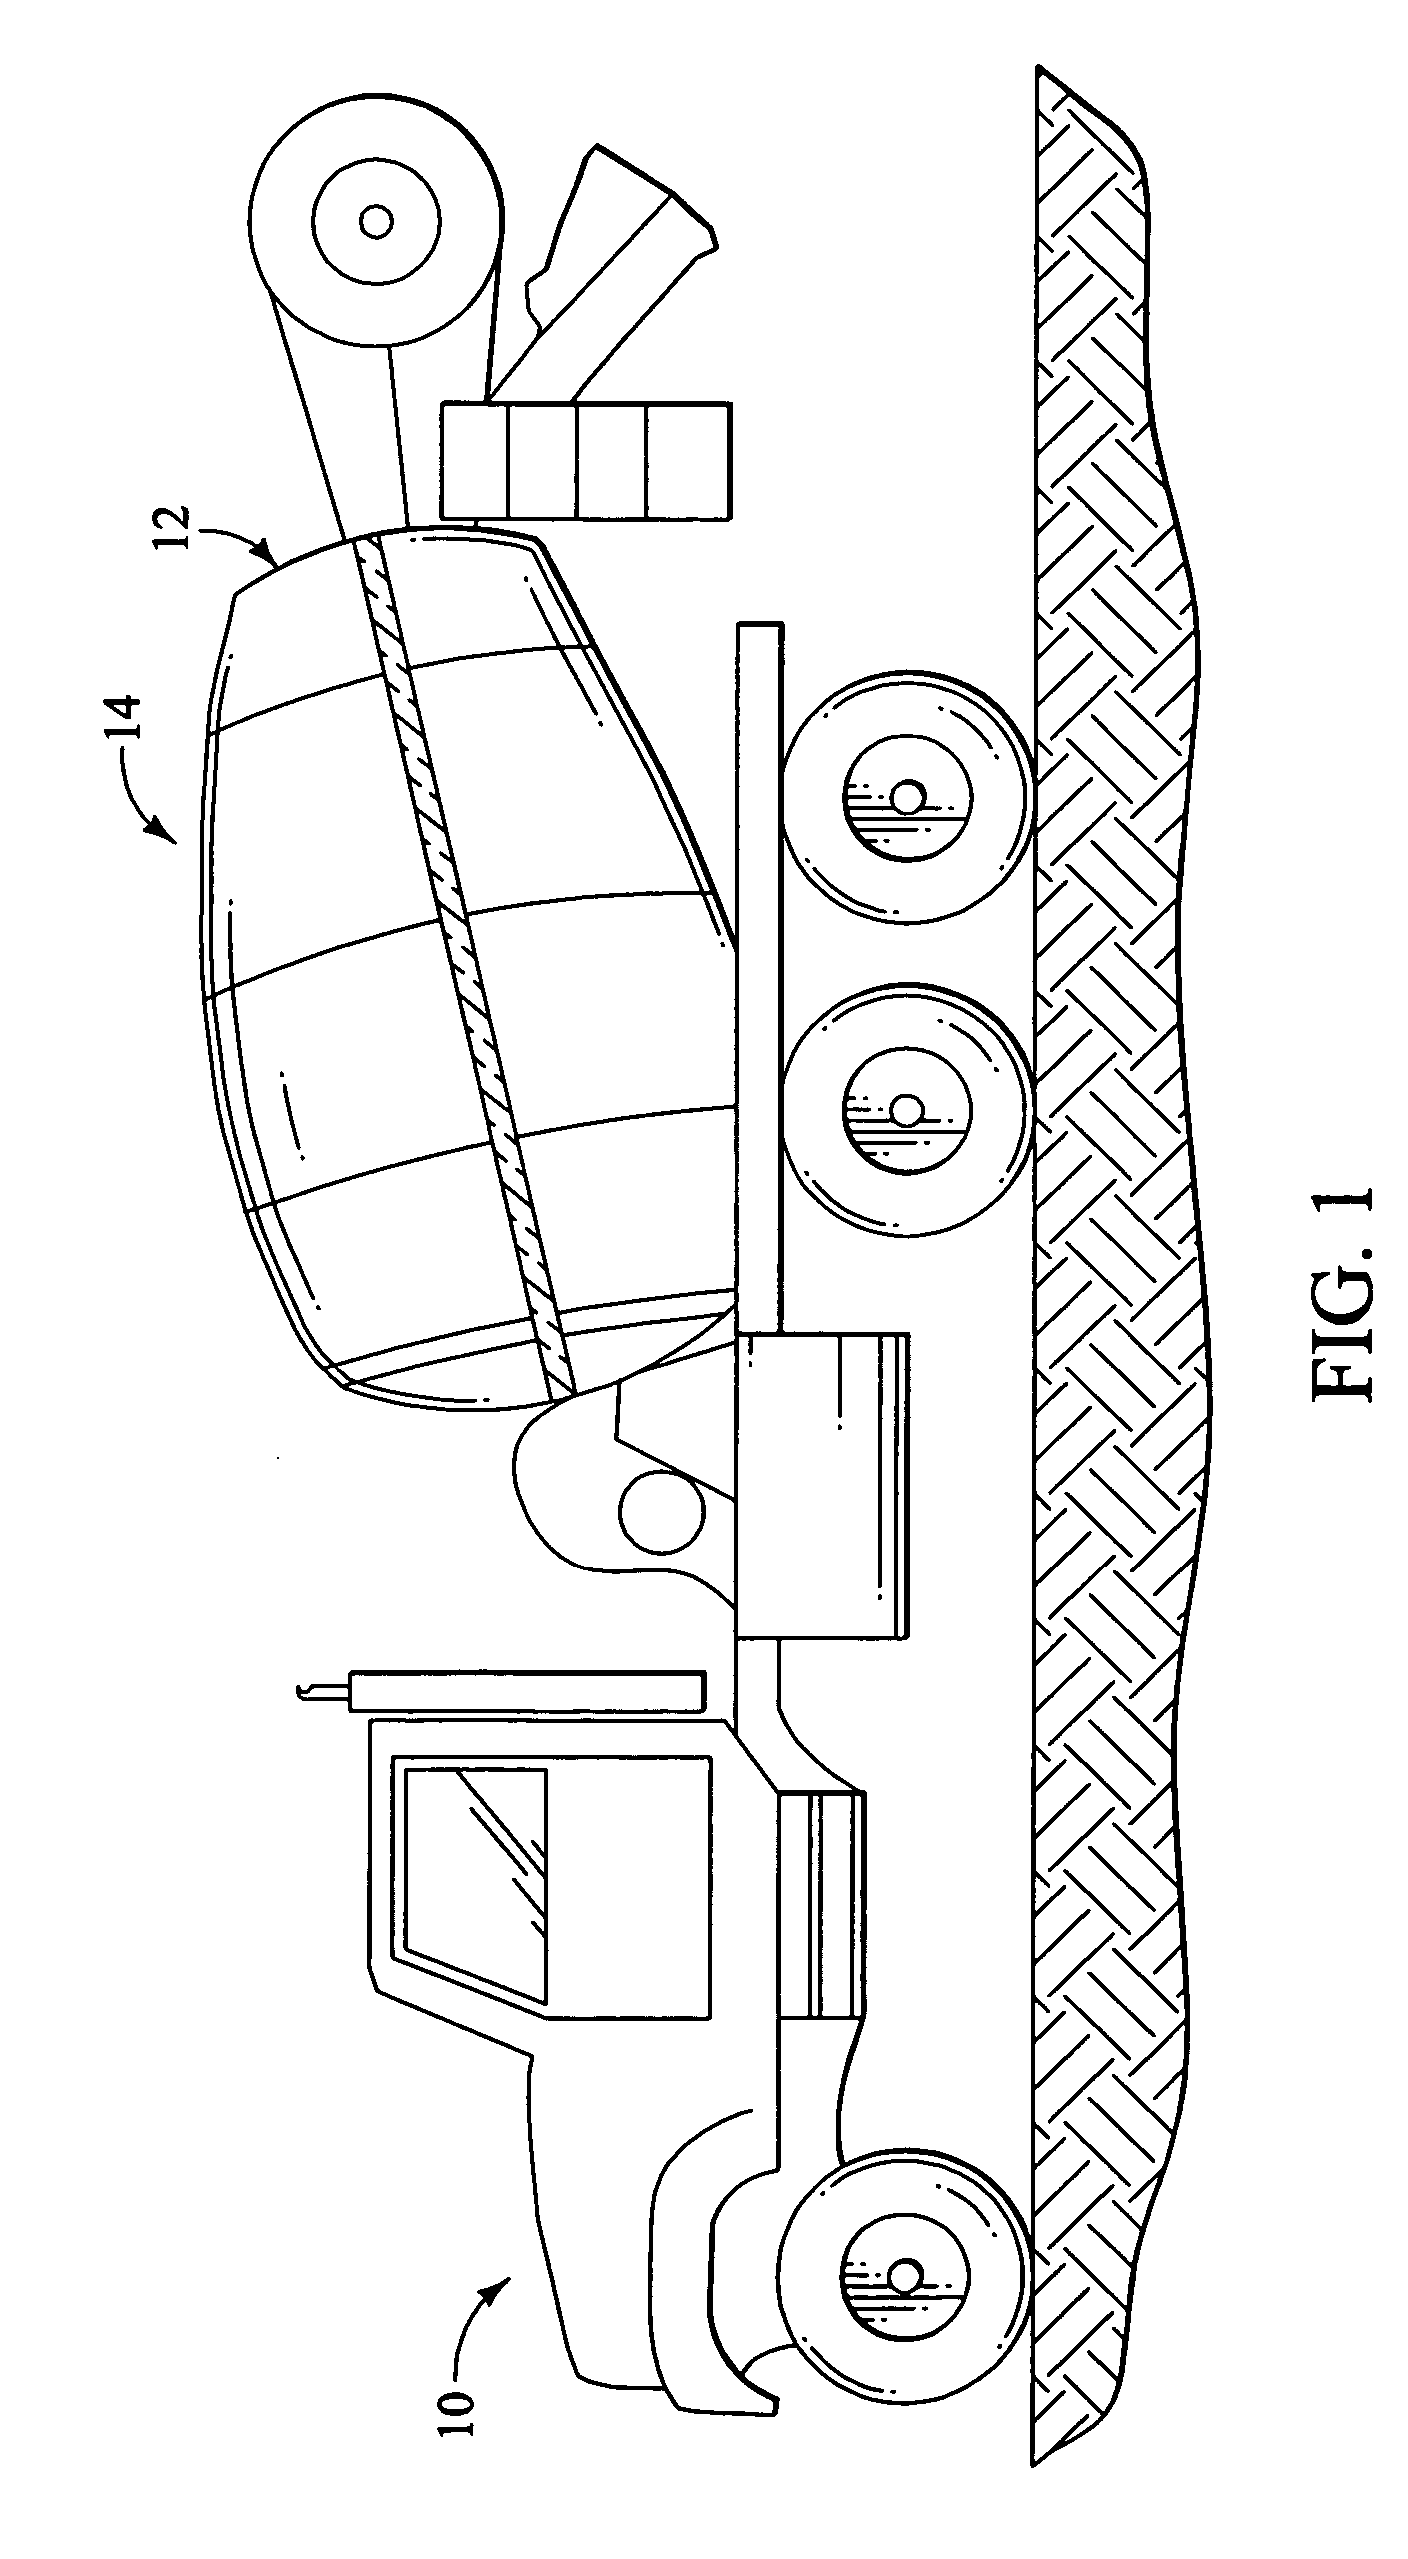 Thermal insulating device for concrete mixing trucks